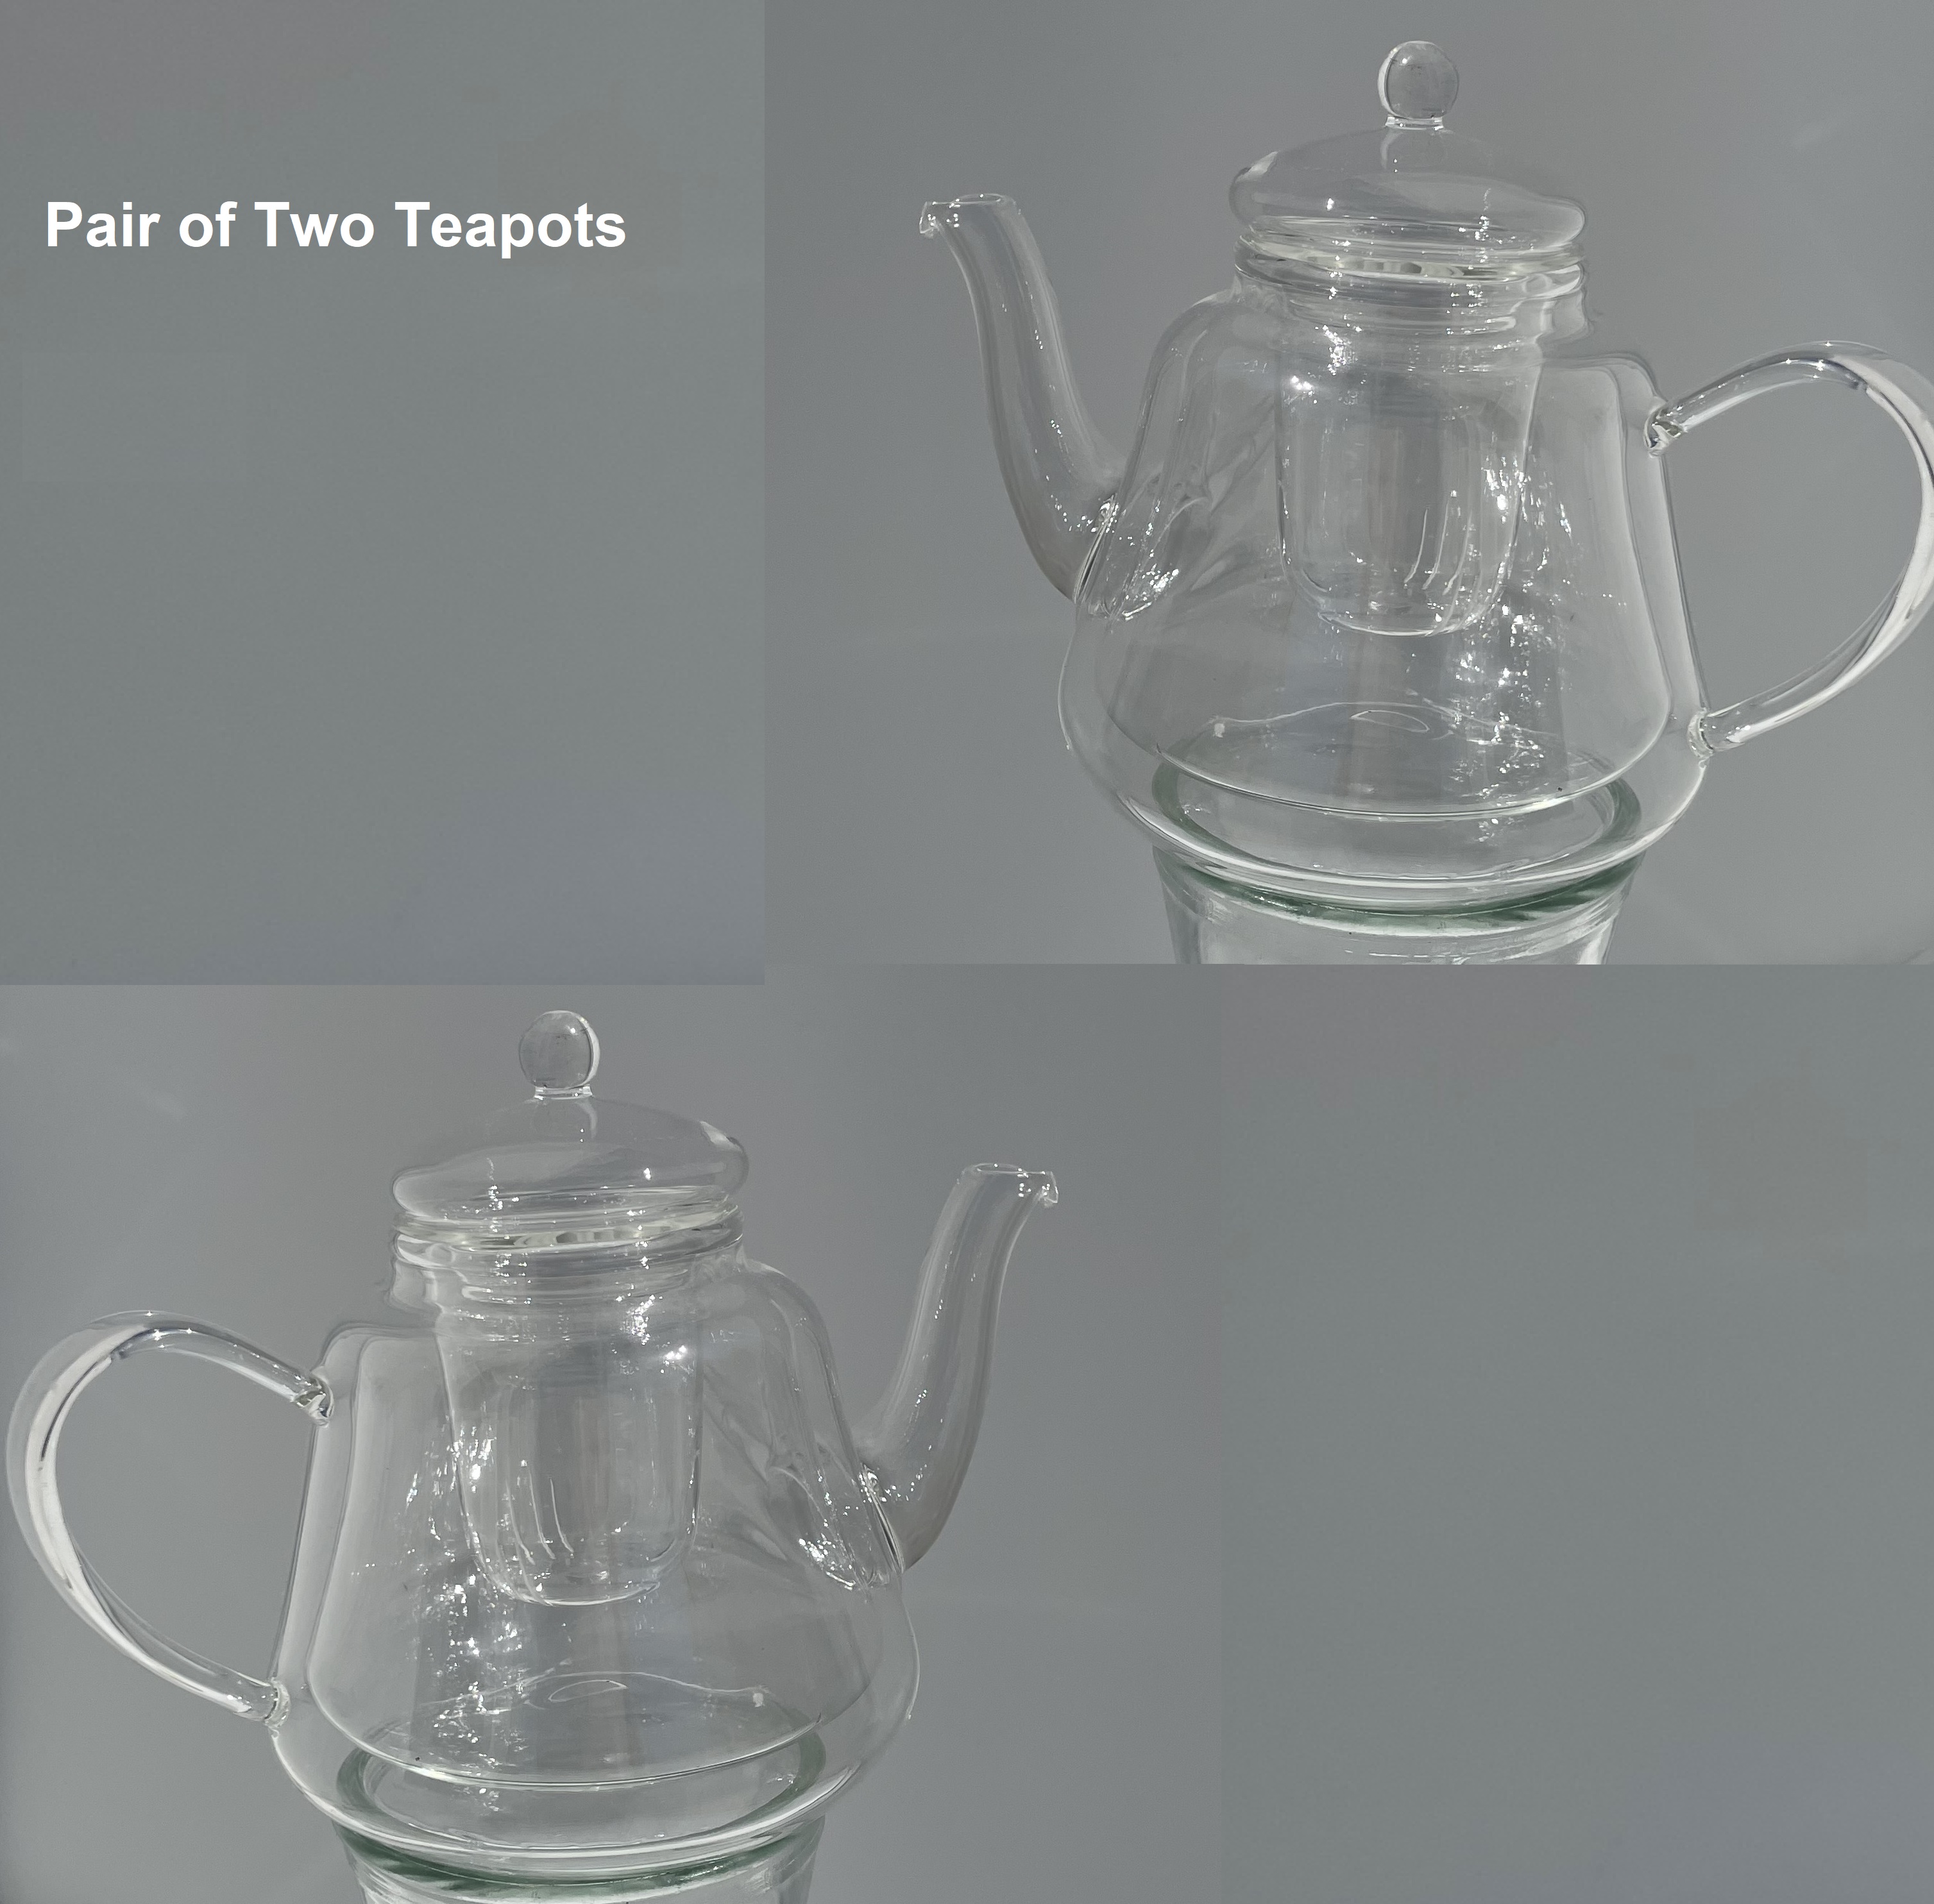 Pair of Oval Shaped Double Layer Glass Teapot, 530ml Teapot with Removable Infuser and Lid, Heatproof Safe side handle, Blooming & Loose Leaf Tea Maker